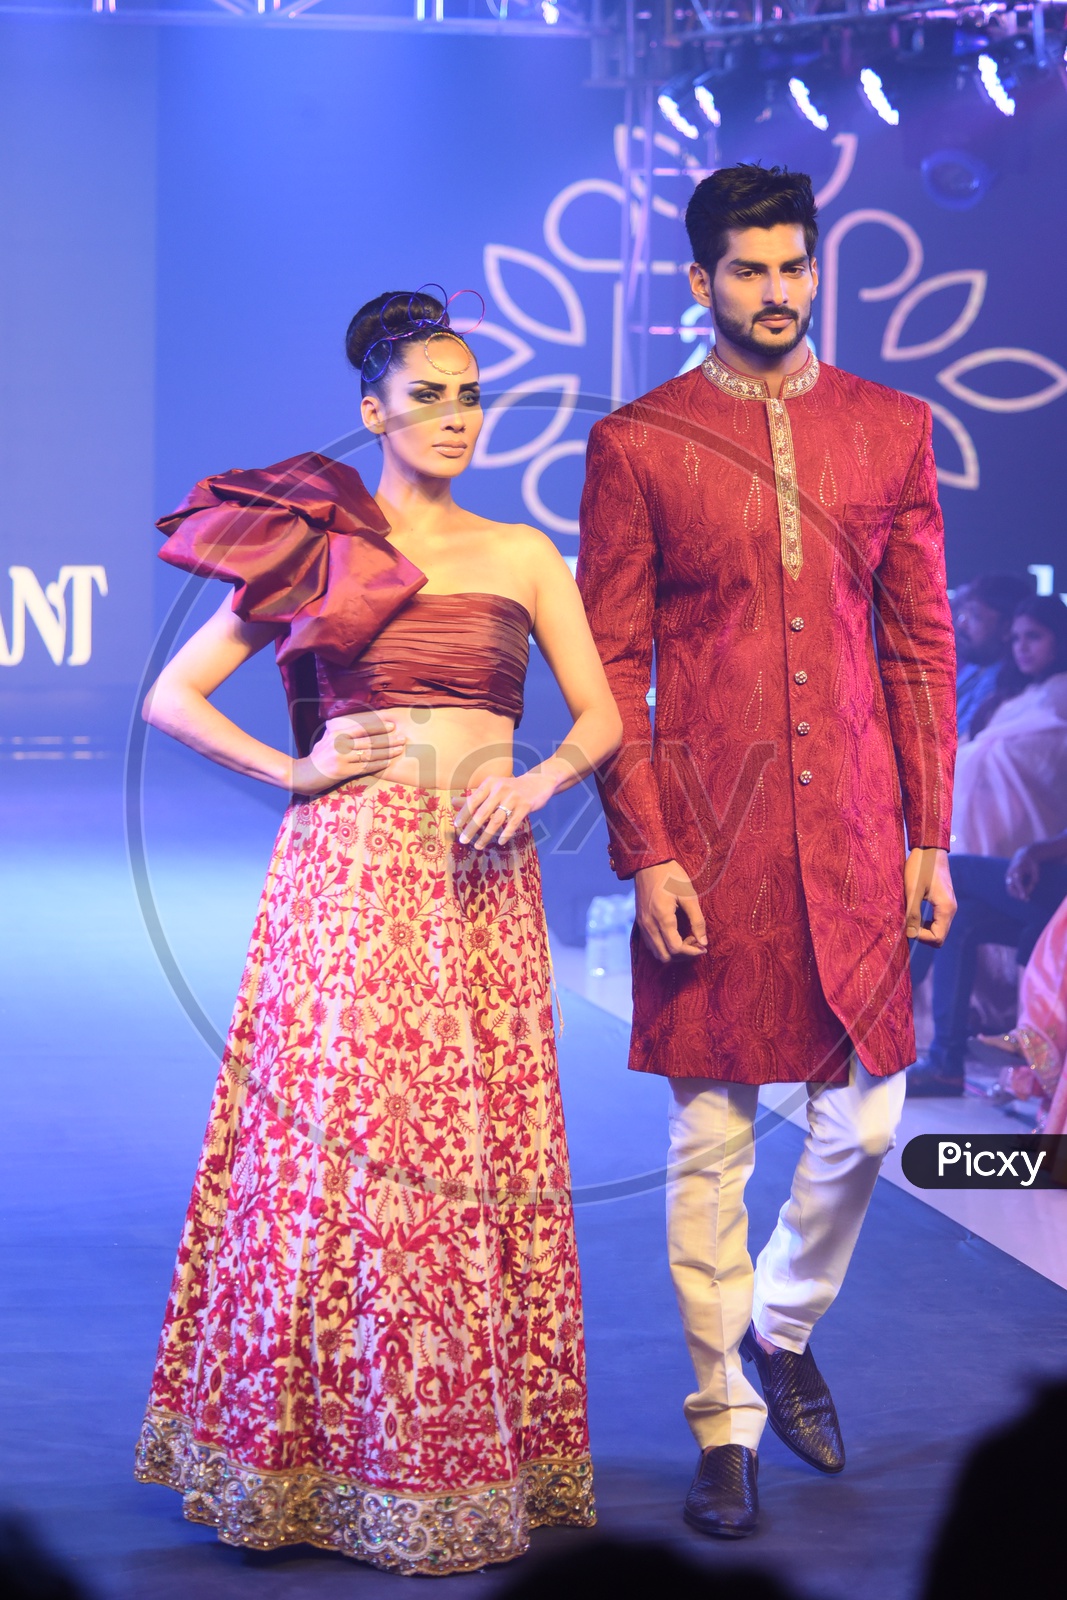 Art meet sophistication, Ritu Beri's fashion show hosted by Volvo cars |  CarTrade